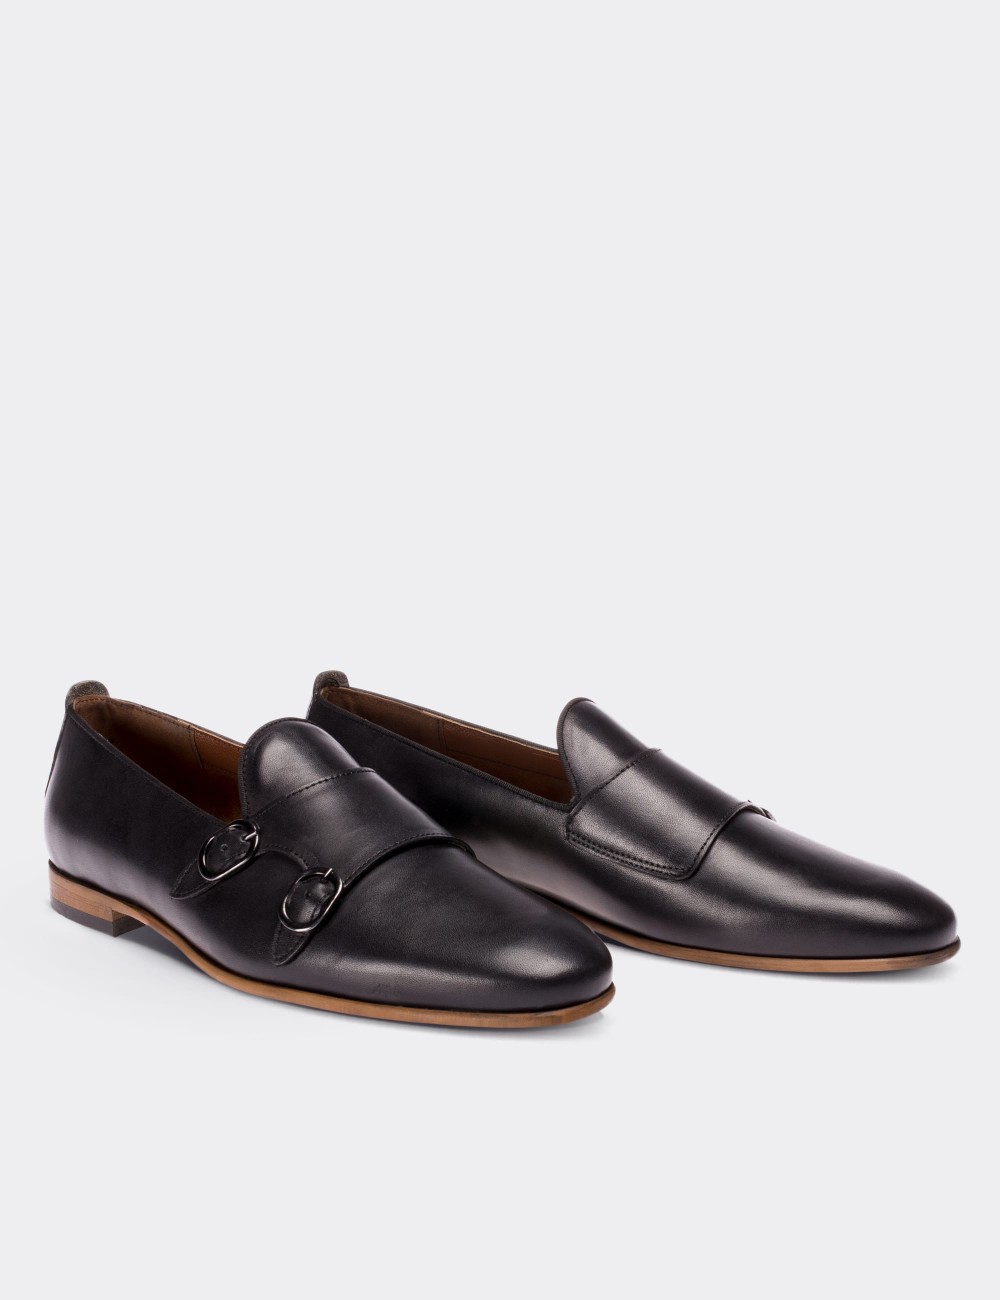 Black  Leather Loafers & Moccasins Shoes - 01705MSYHM01